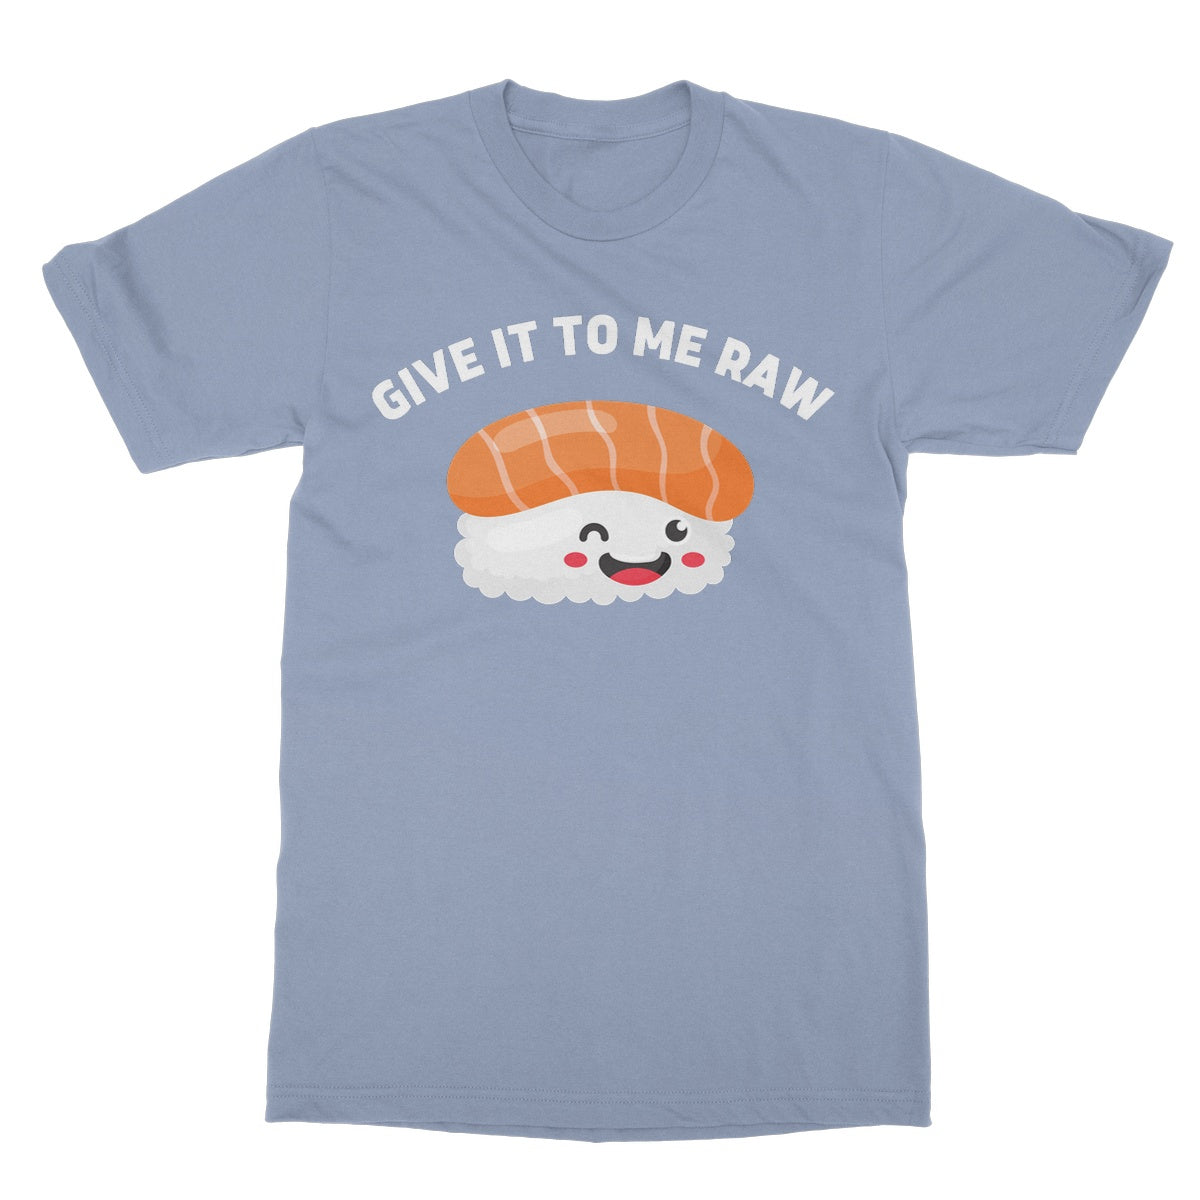 give it to me raw t shirt blue